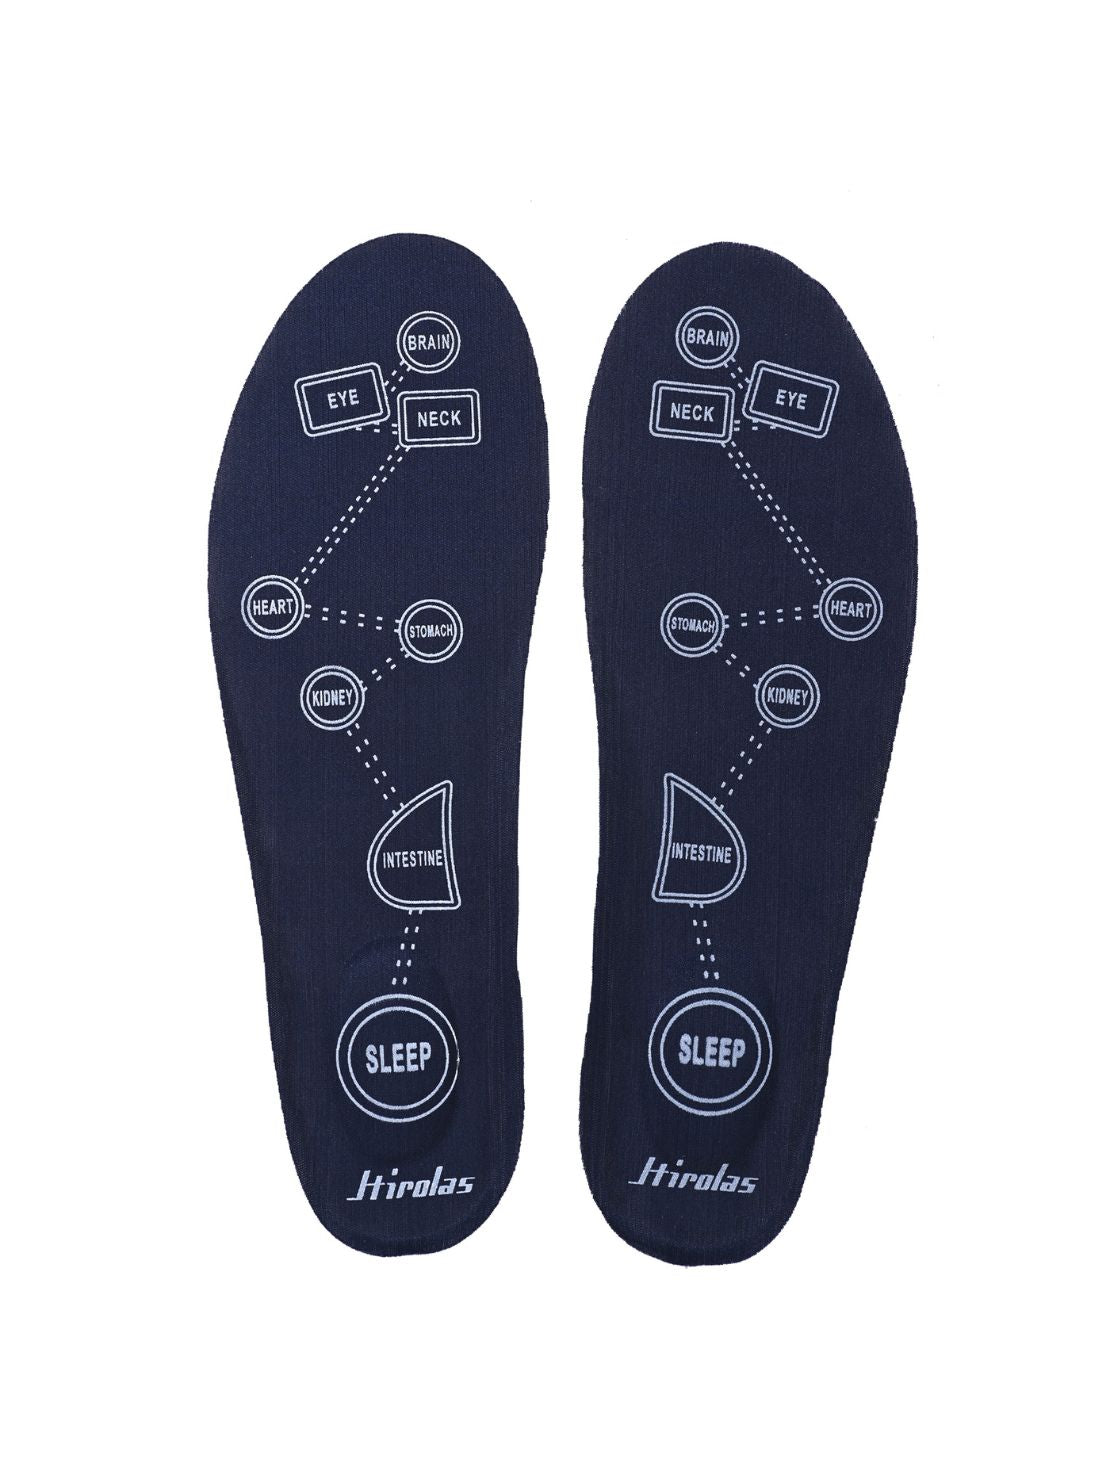 Hirolas Blue PU Insole foam Shoe Heels for all Shoes makes shoes Super Soft & Comfortable | PU Insoles|Cushioning for Feet Relief, Comfortable Insoles